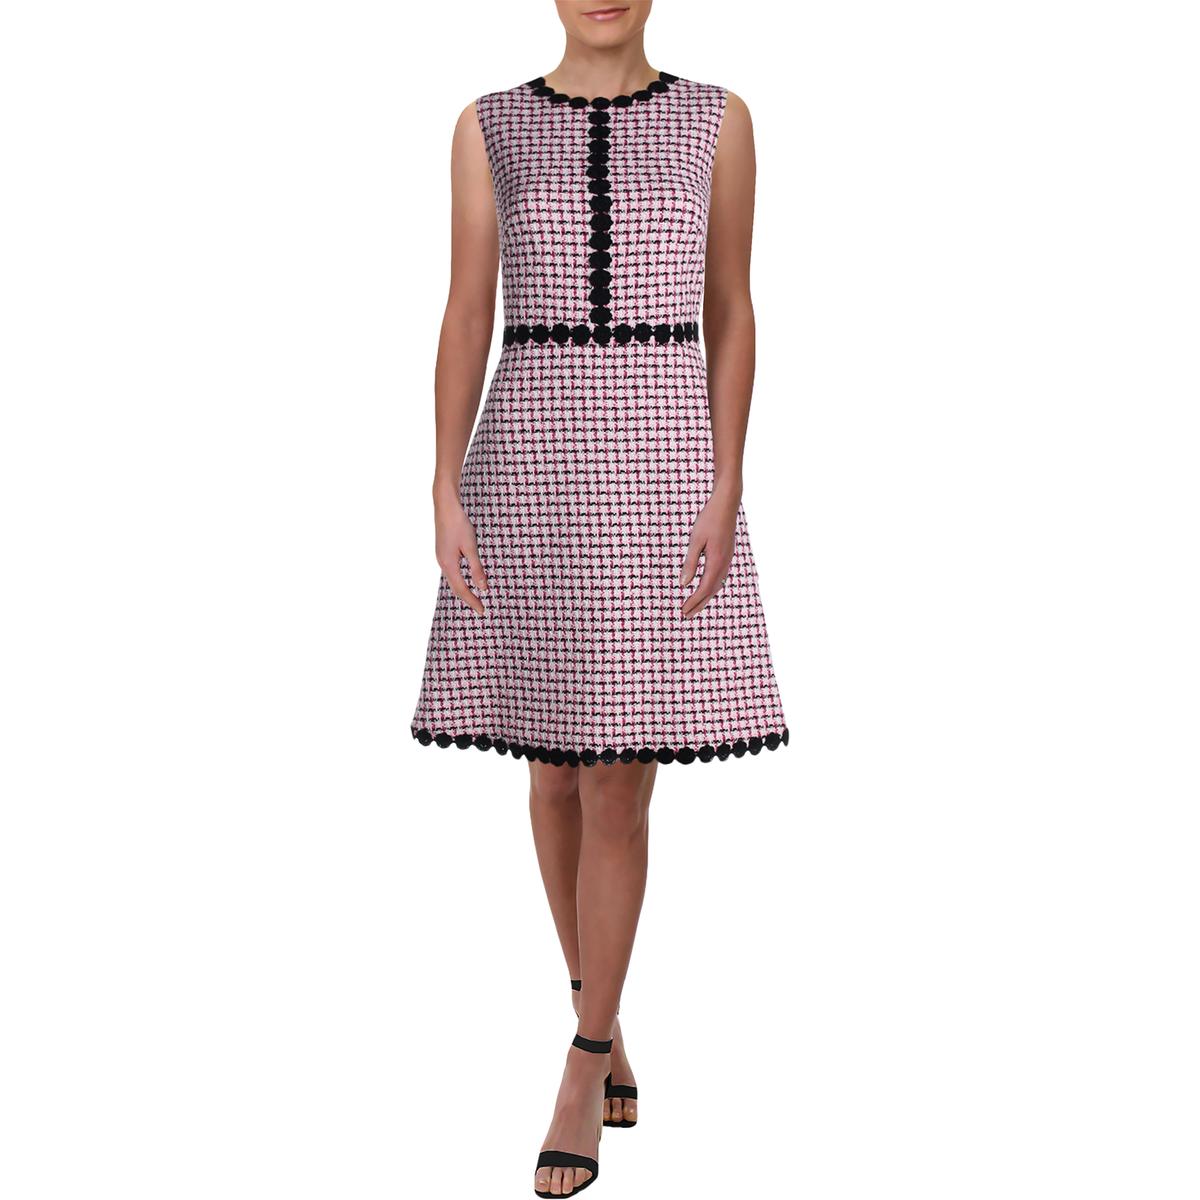 Kate Spade Womens Pink Tweed Floral Sleeveless Party Dress 8 BHFO 0010 ...